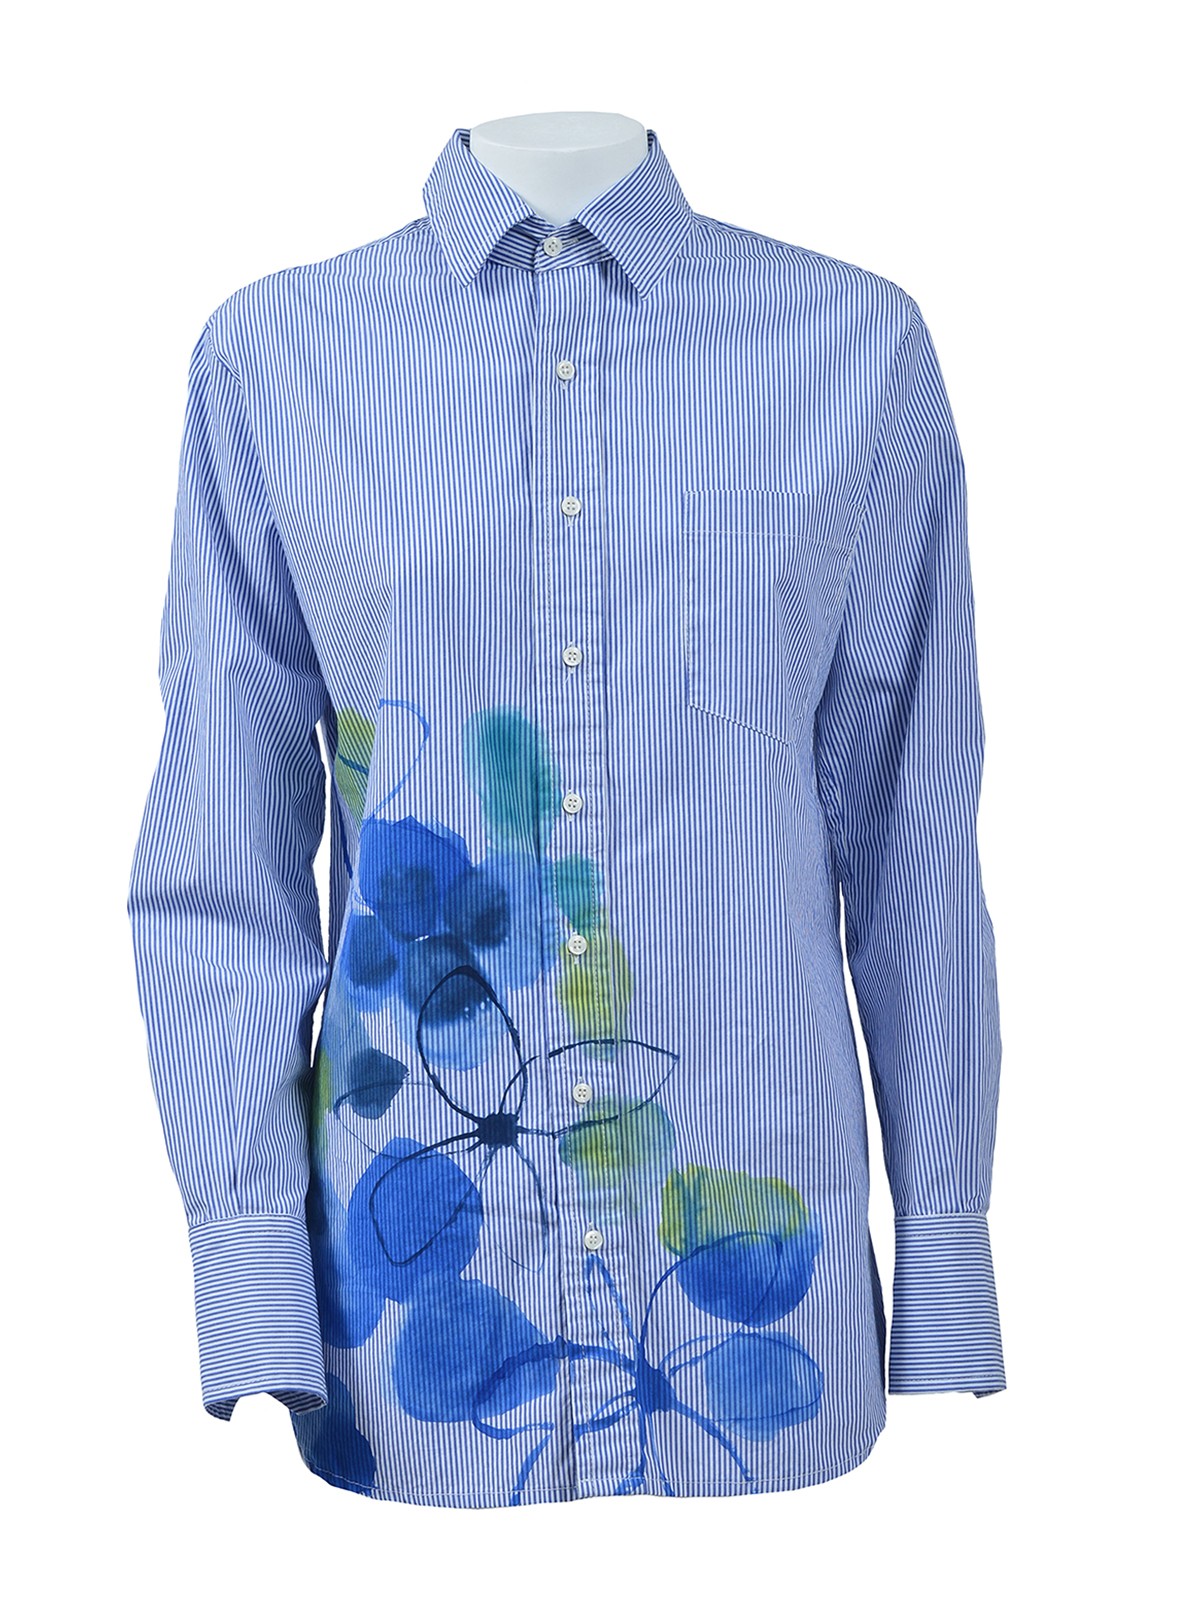 Eleven88 Hand-painted Cotton Shirt In Azul Claro